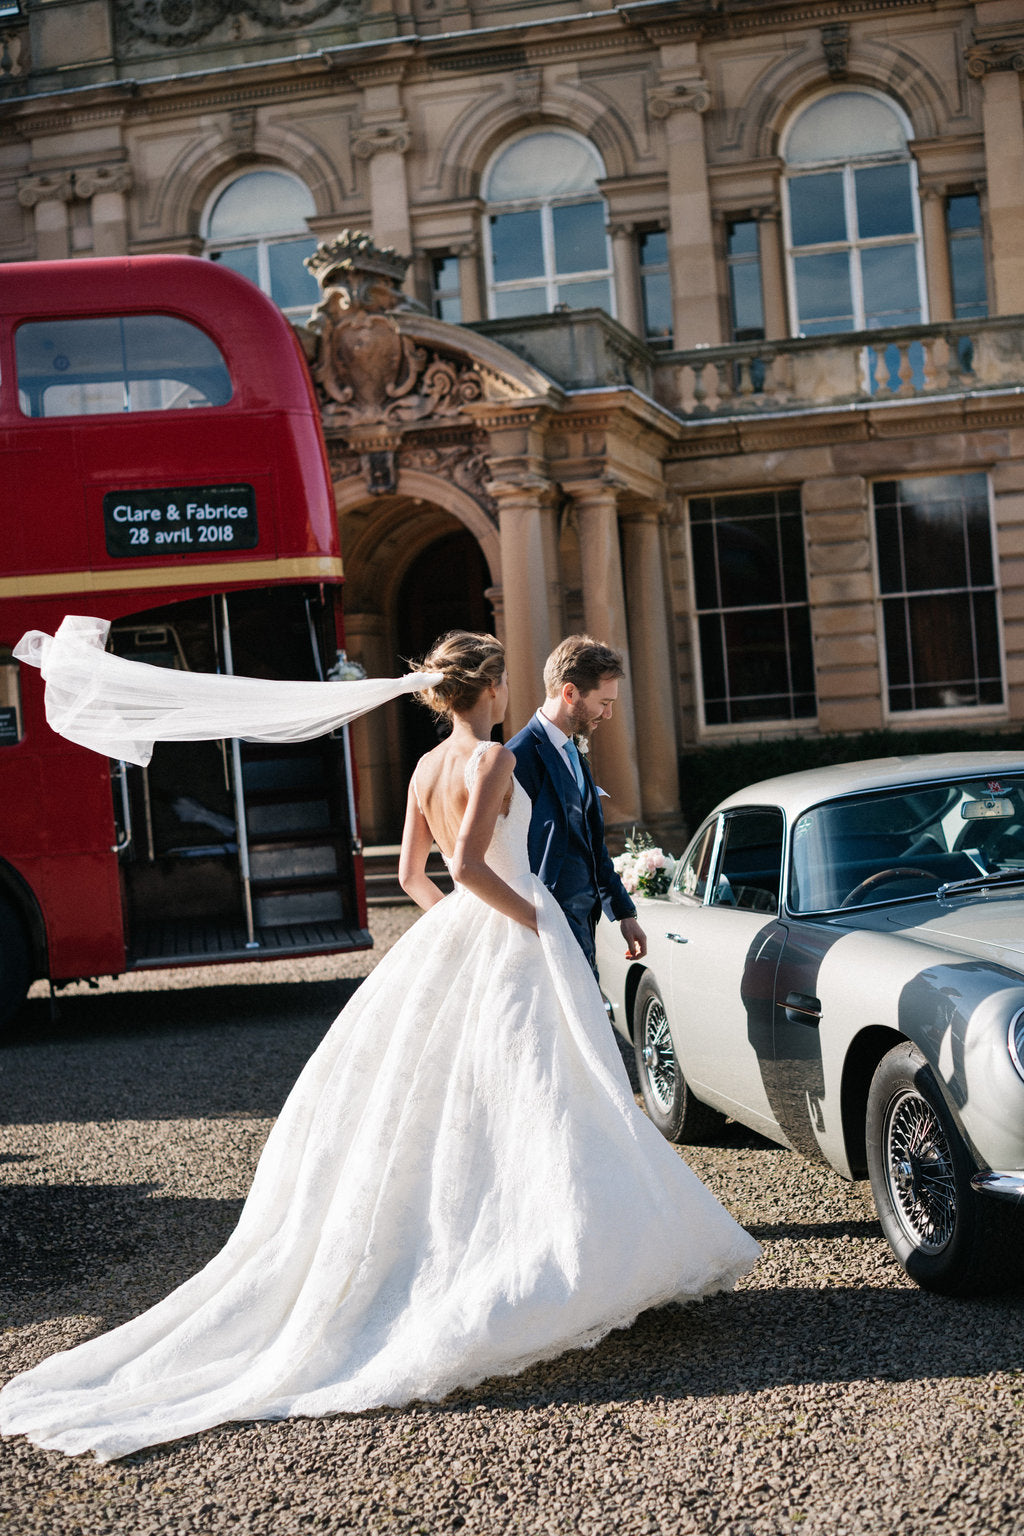 Clare & Fabrice’s Scottish-French Wedding at Gosford House